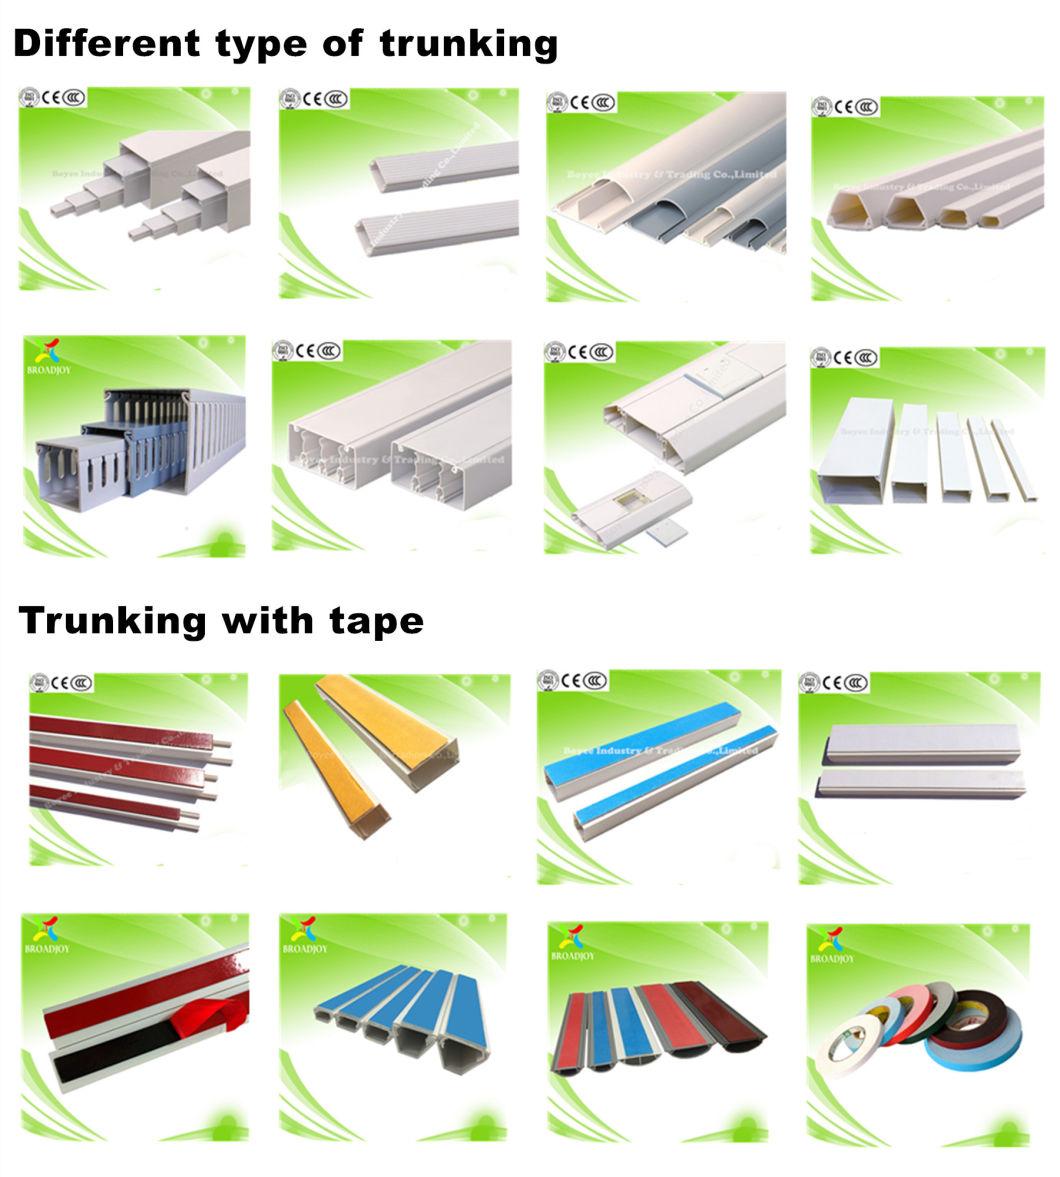 PVC Trunking with Blue Glue or Red Adhesive